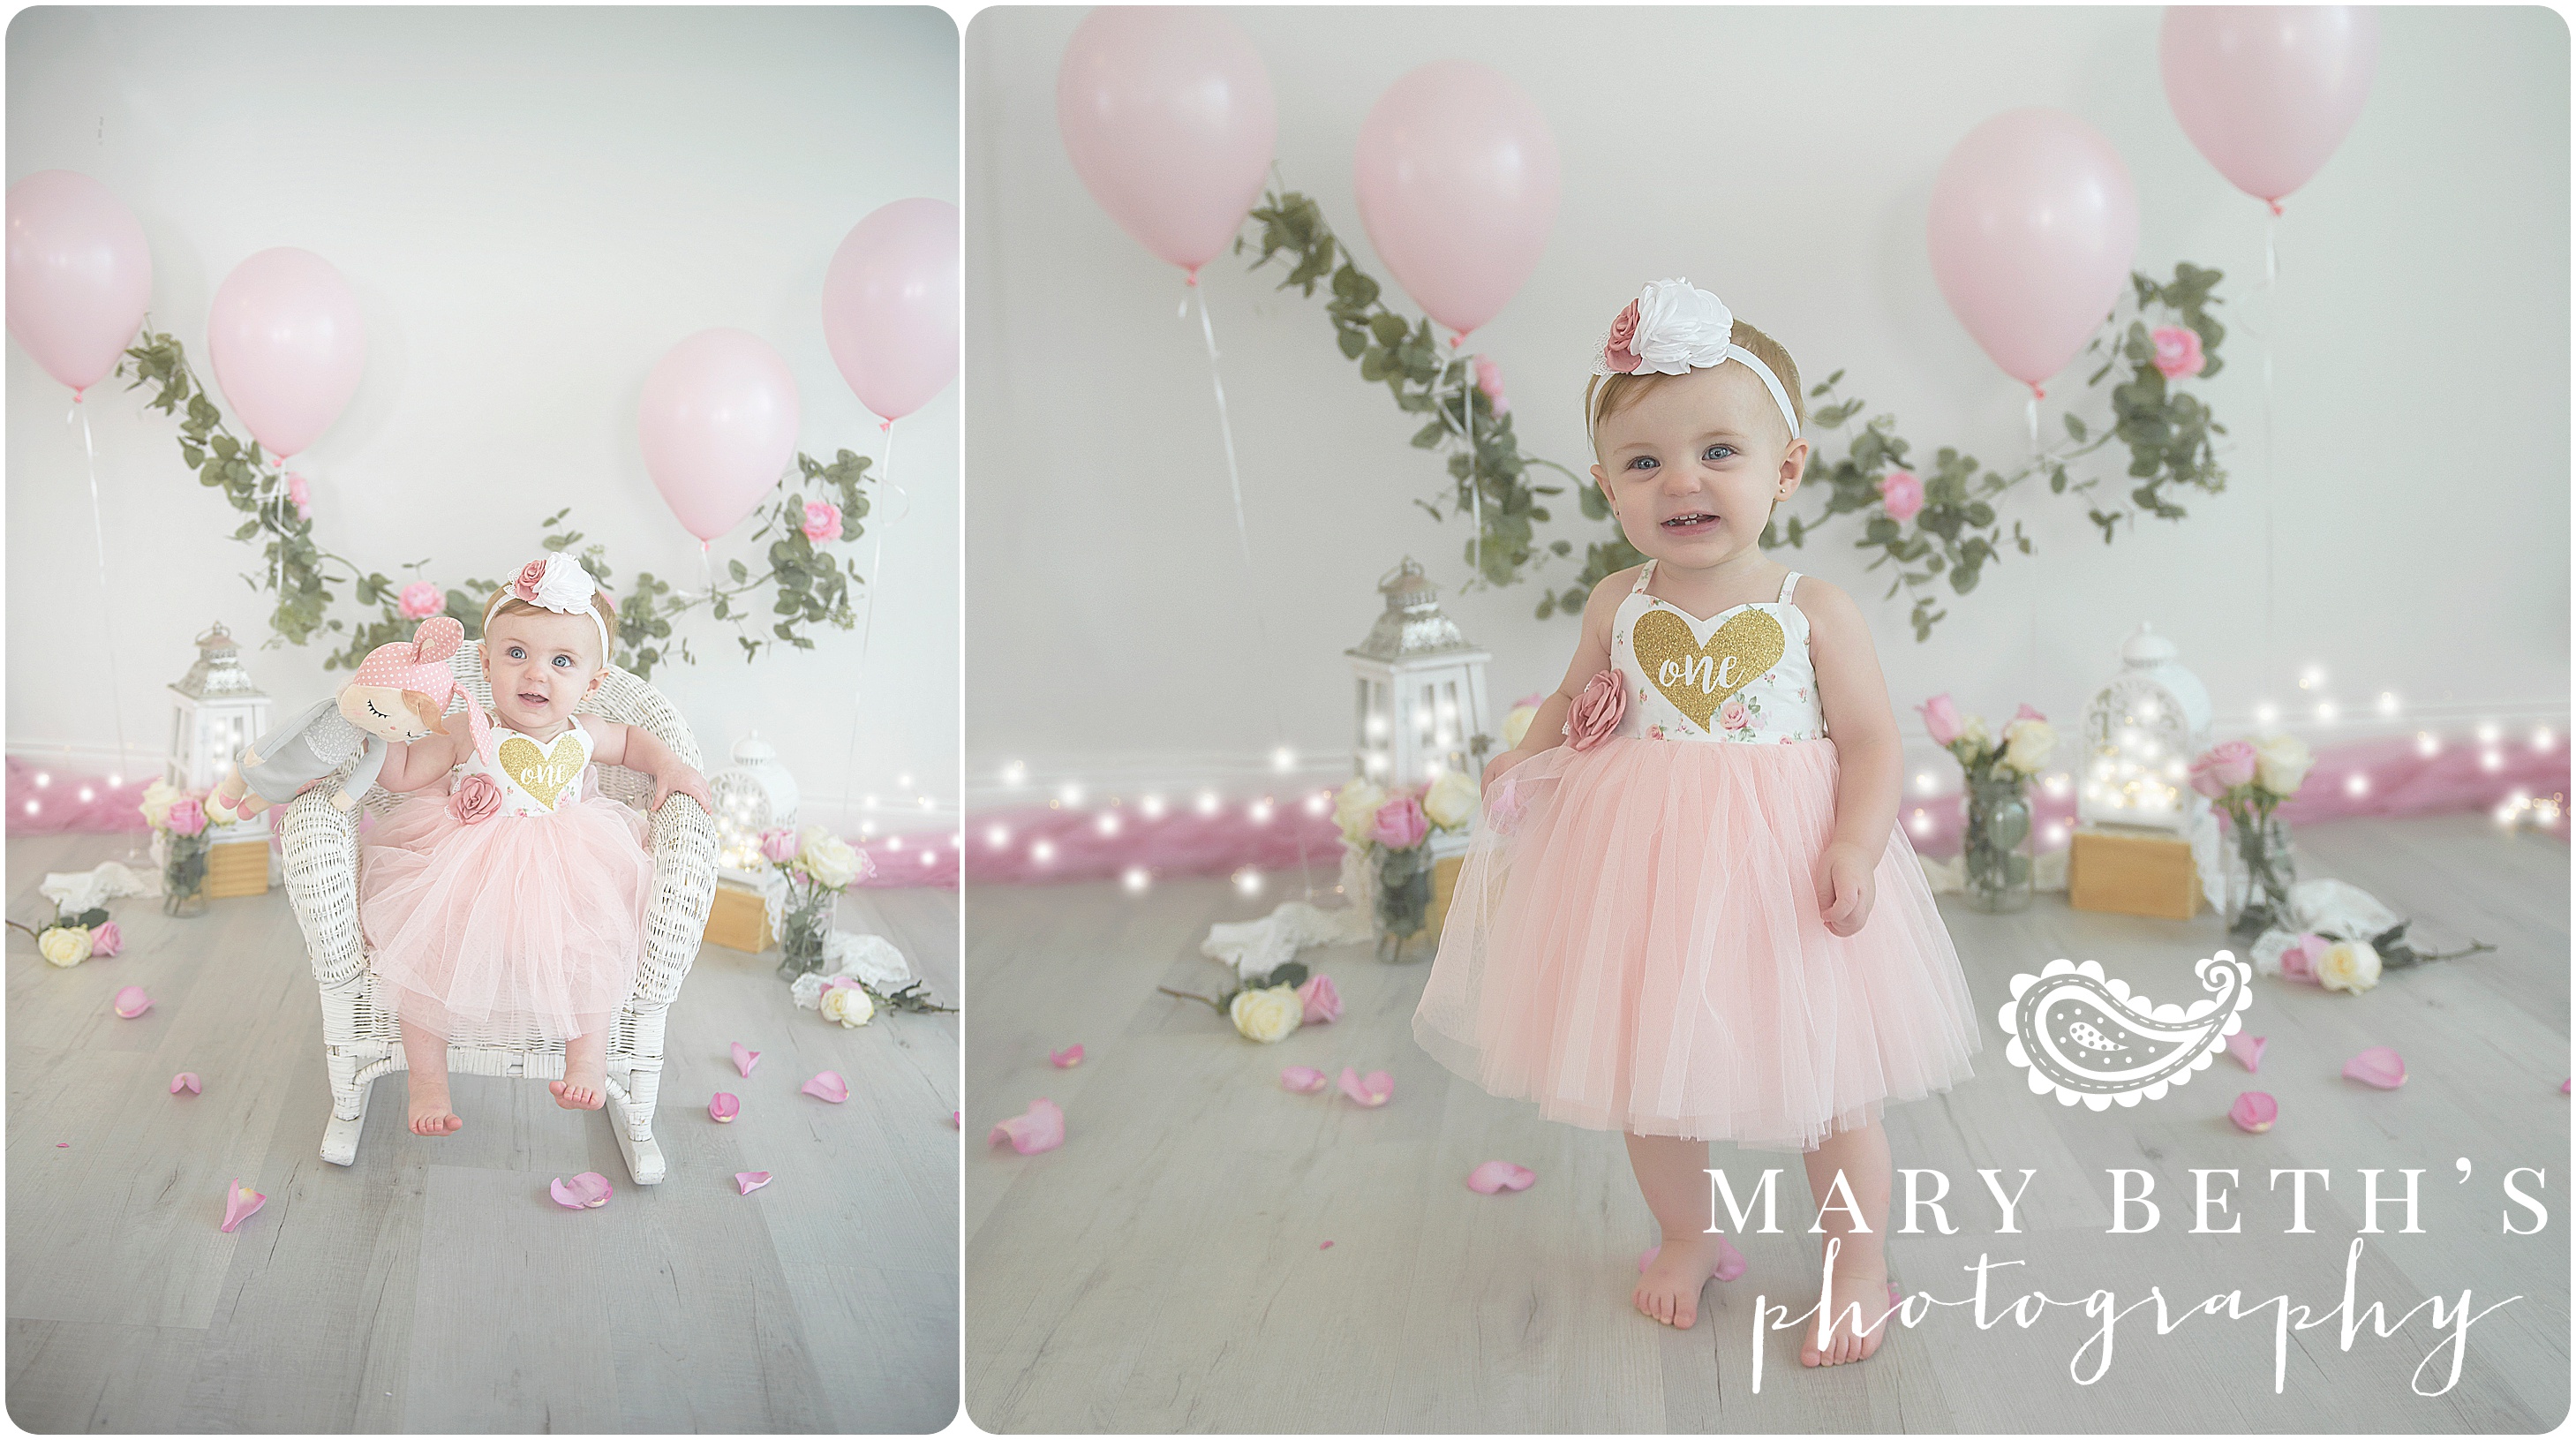 Floral themed 1st Birthday Cake Smash Session